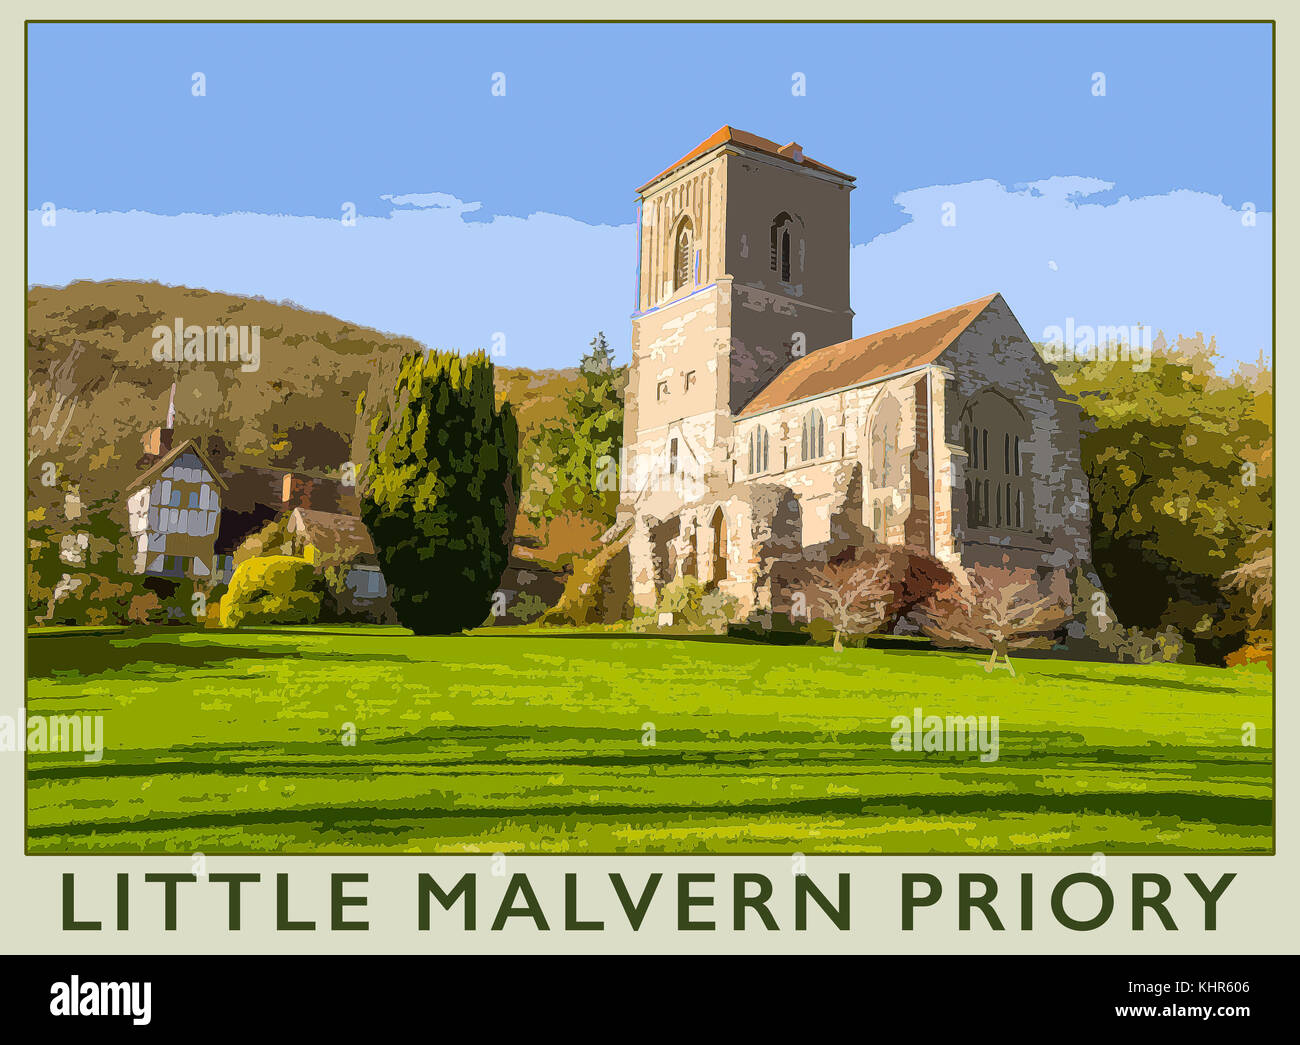 Little Malvern Priory, Little Malvern formaly a Benedictine monastery, converted into a poster style image, Worcestershire, England, UK Stock Photo